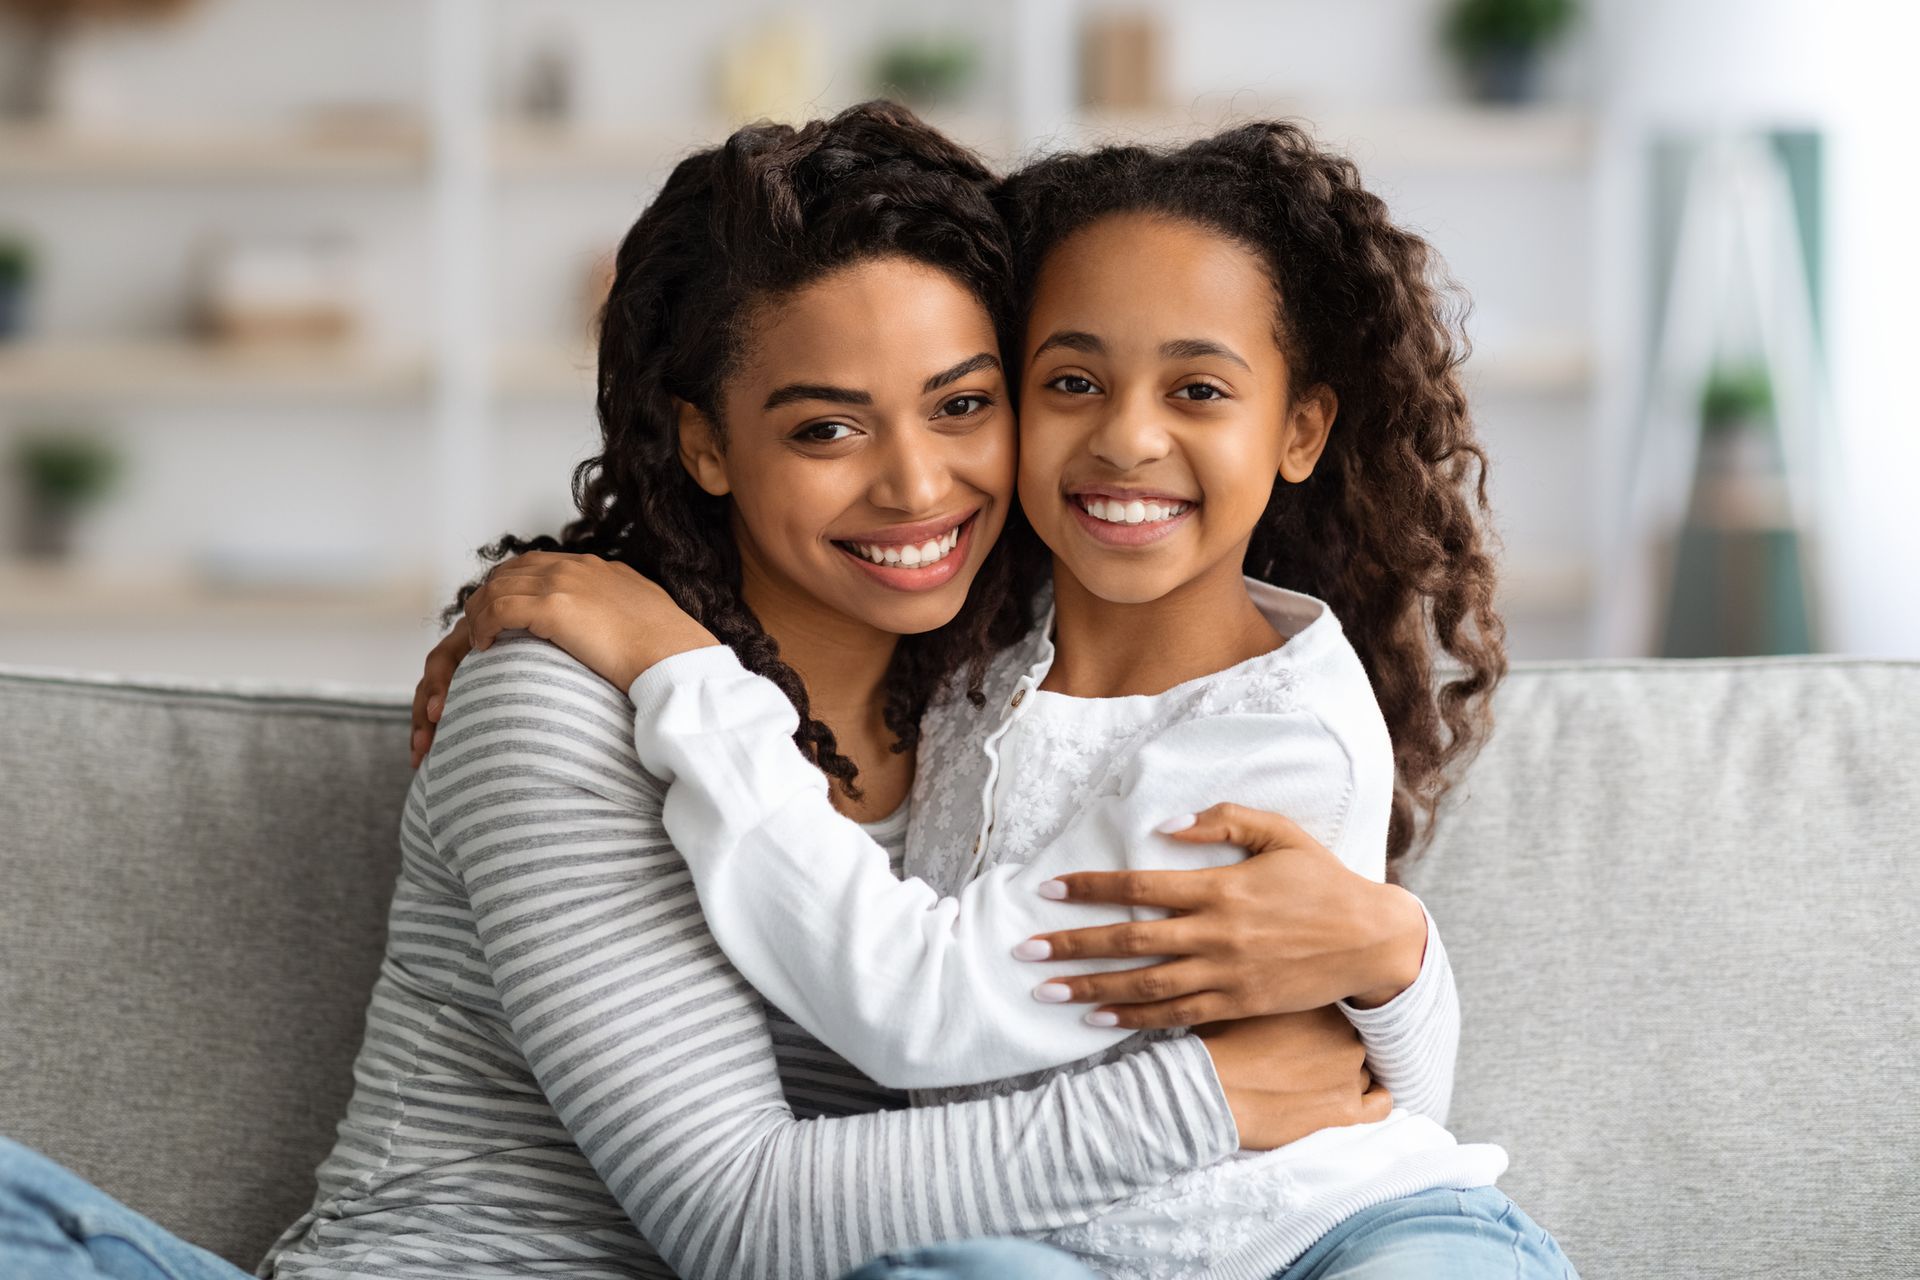 A mother and daughter are hugging each other while sitting on a couch.